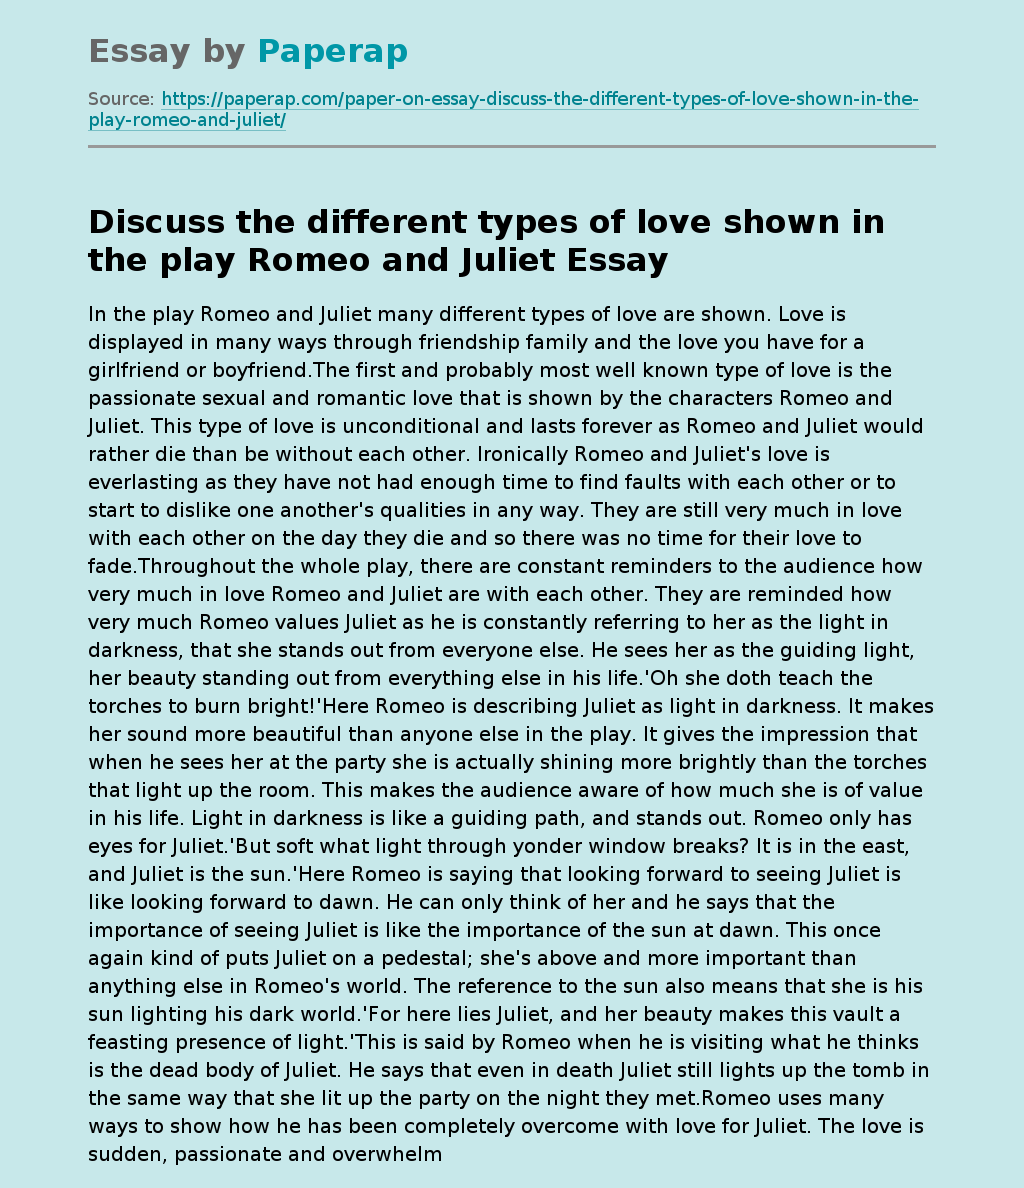 Discuss the different types of love shown in the play Romeo and Juliet